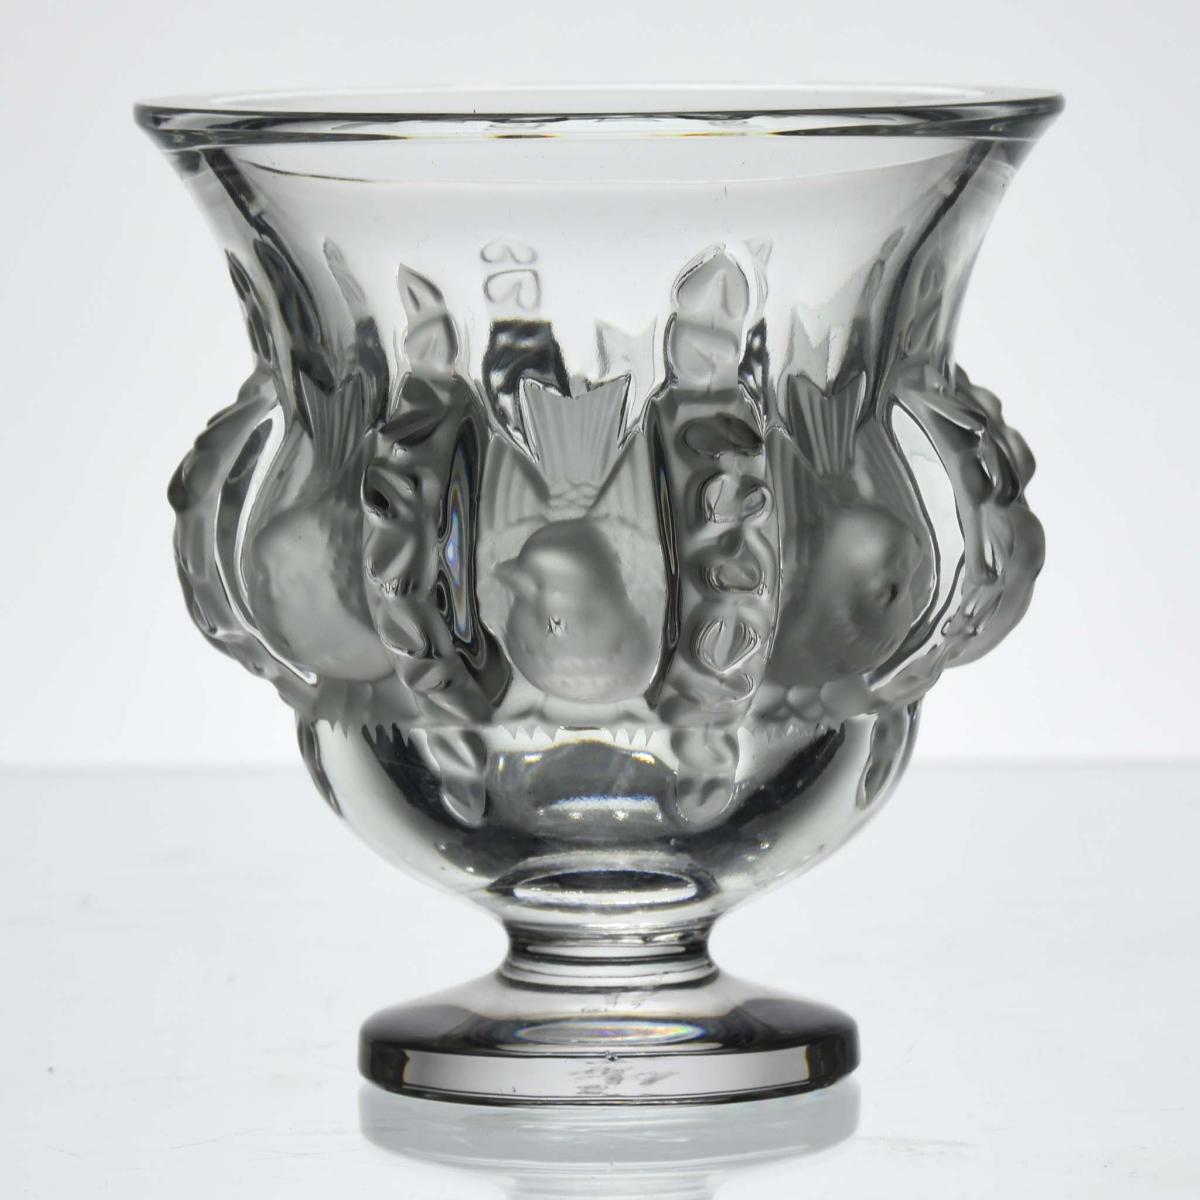 Mid 20th Century Satin Glass "Dampierre Vase" by Marc Lalique